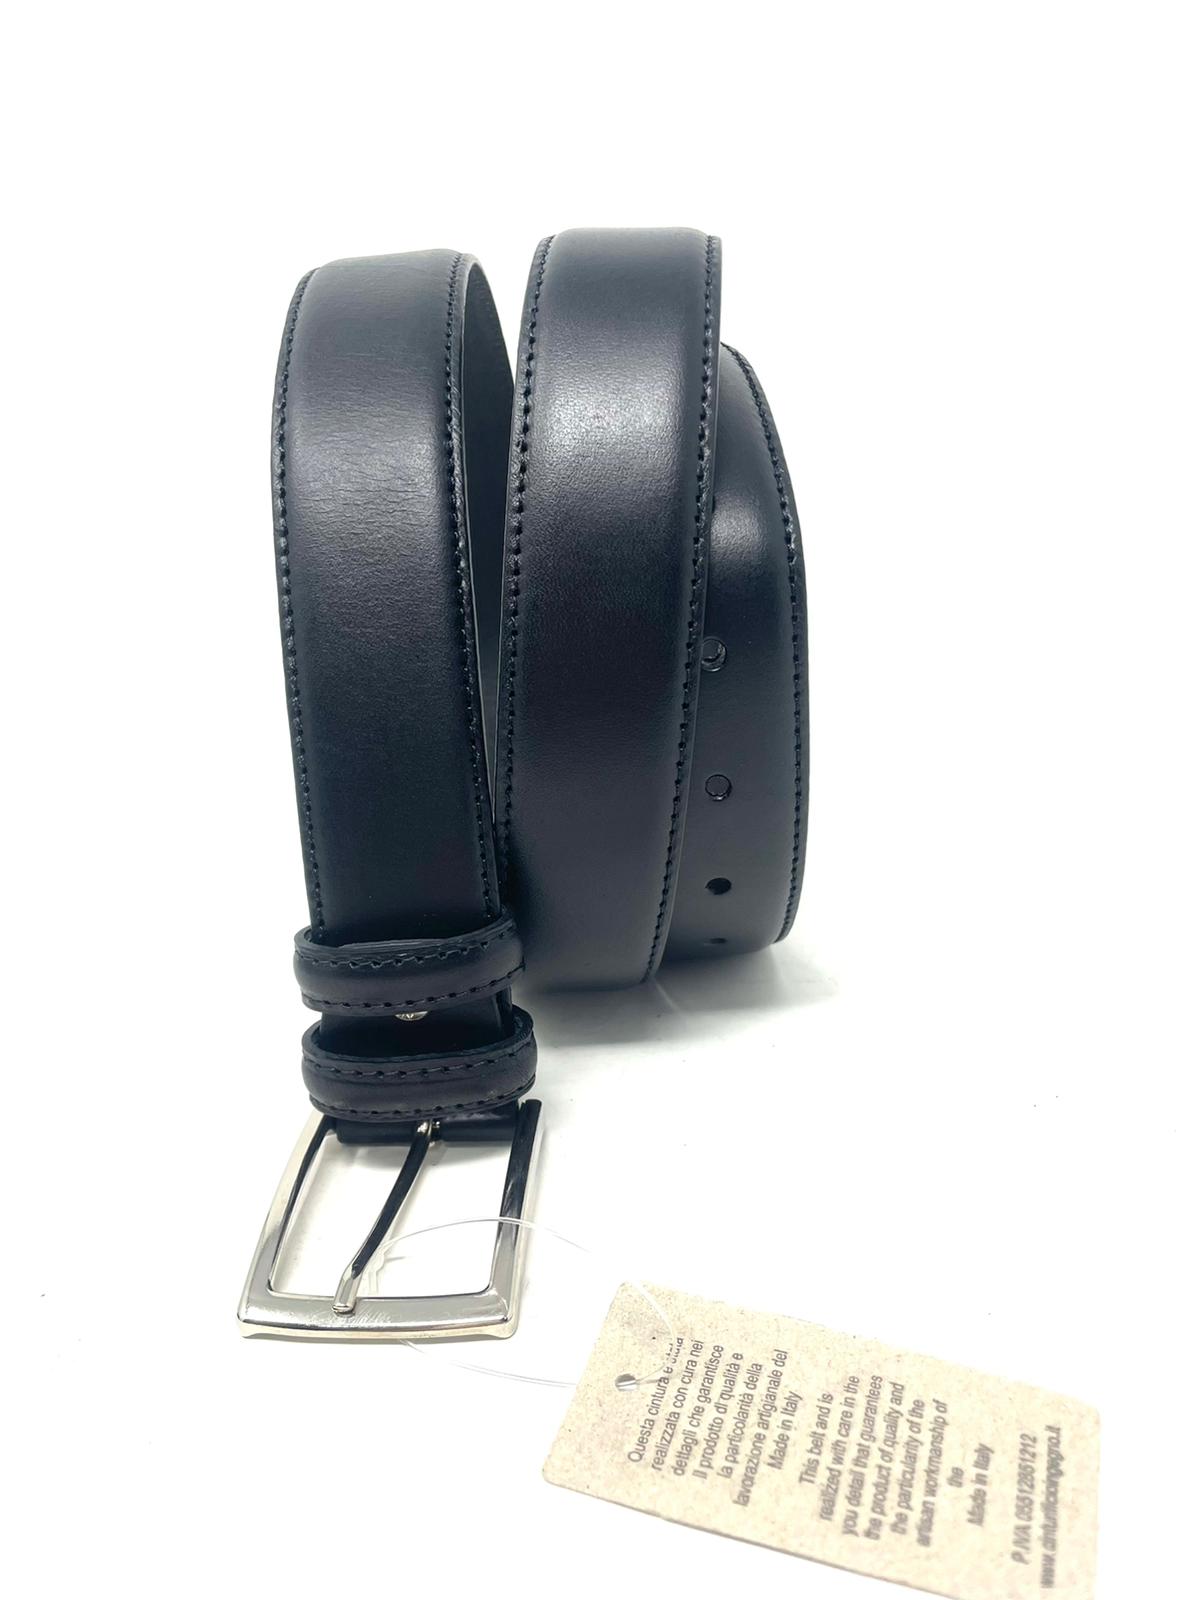 Oiled leather belt made in Italy